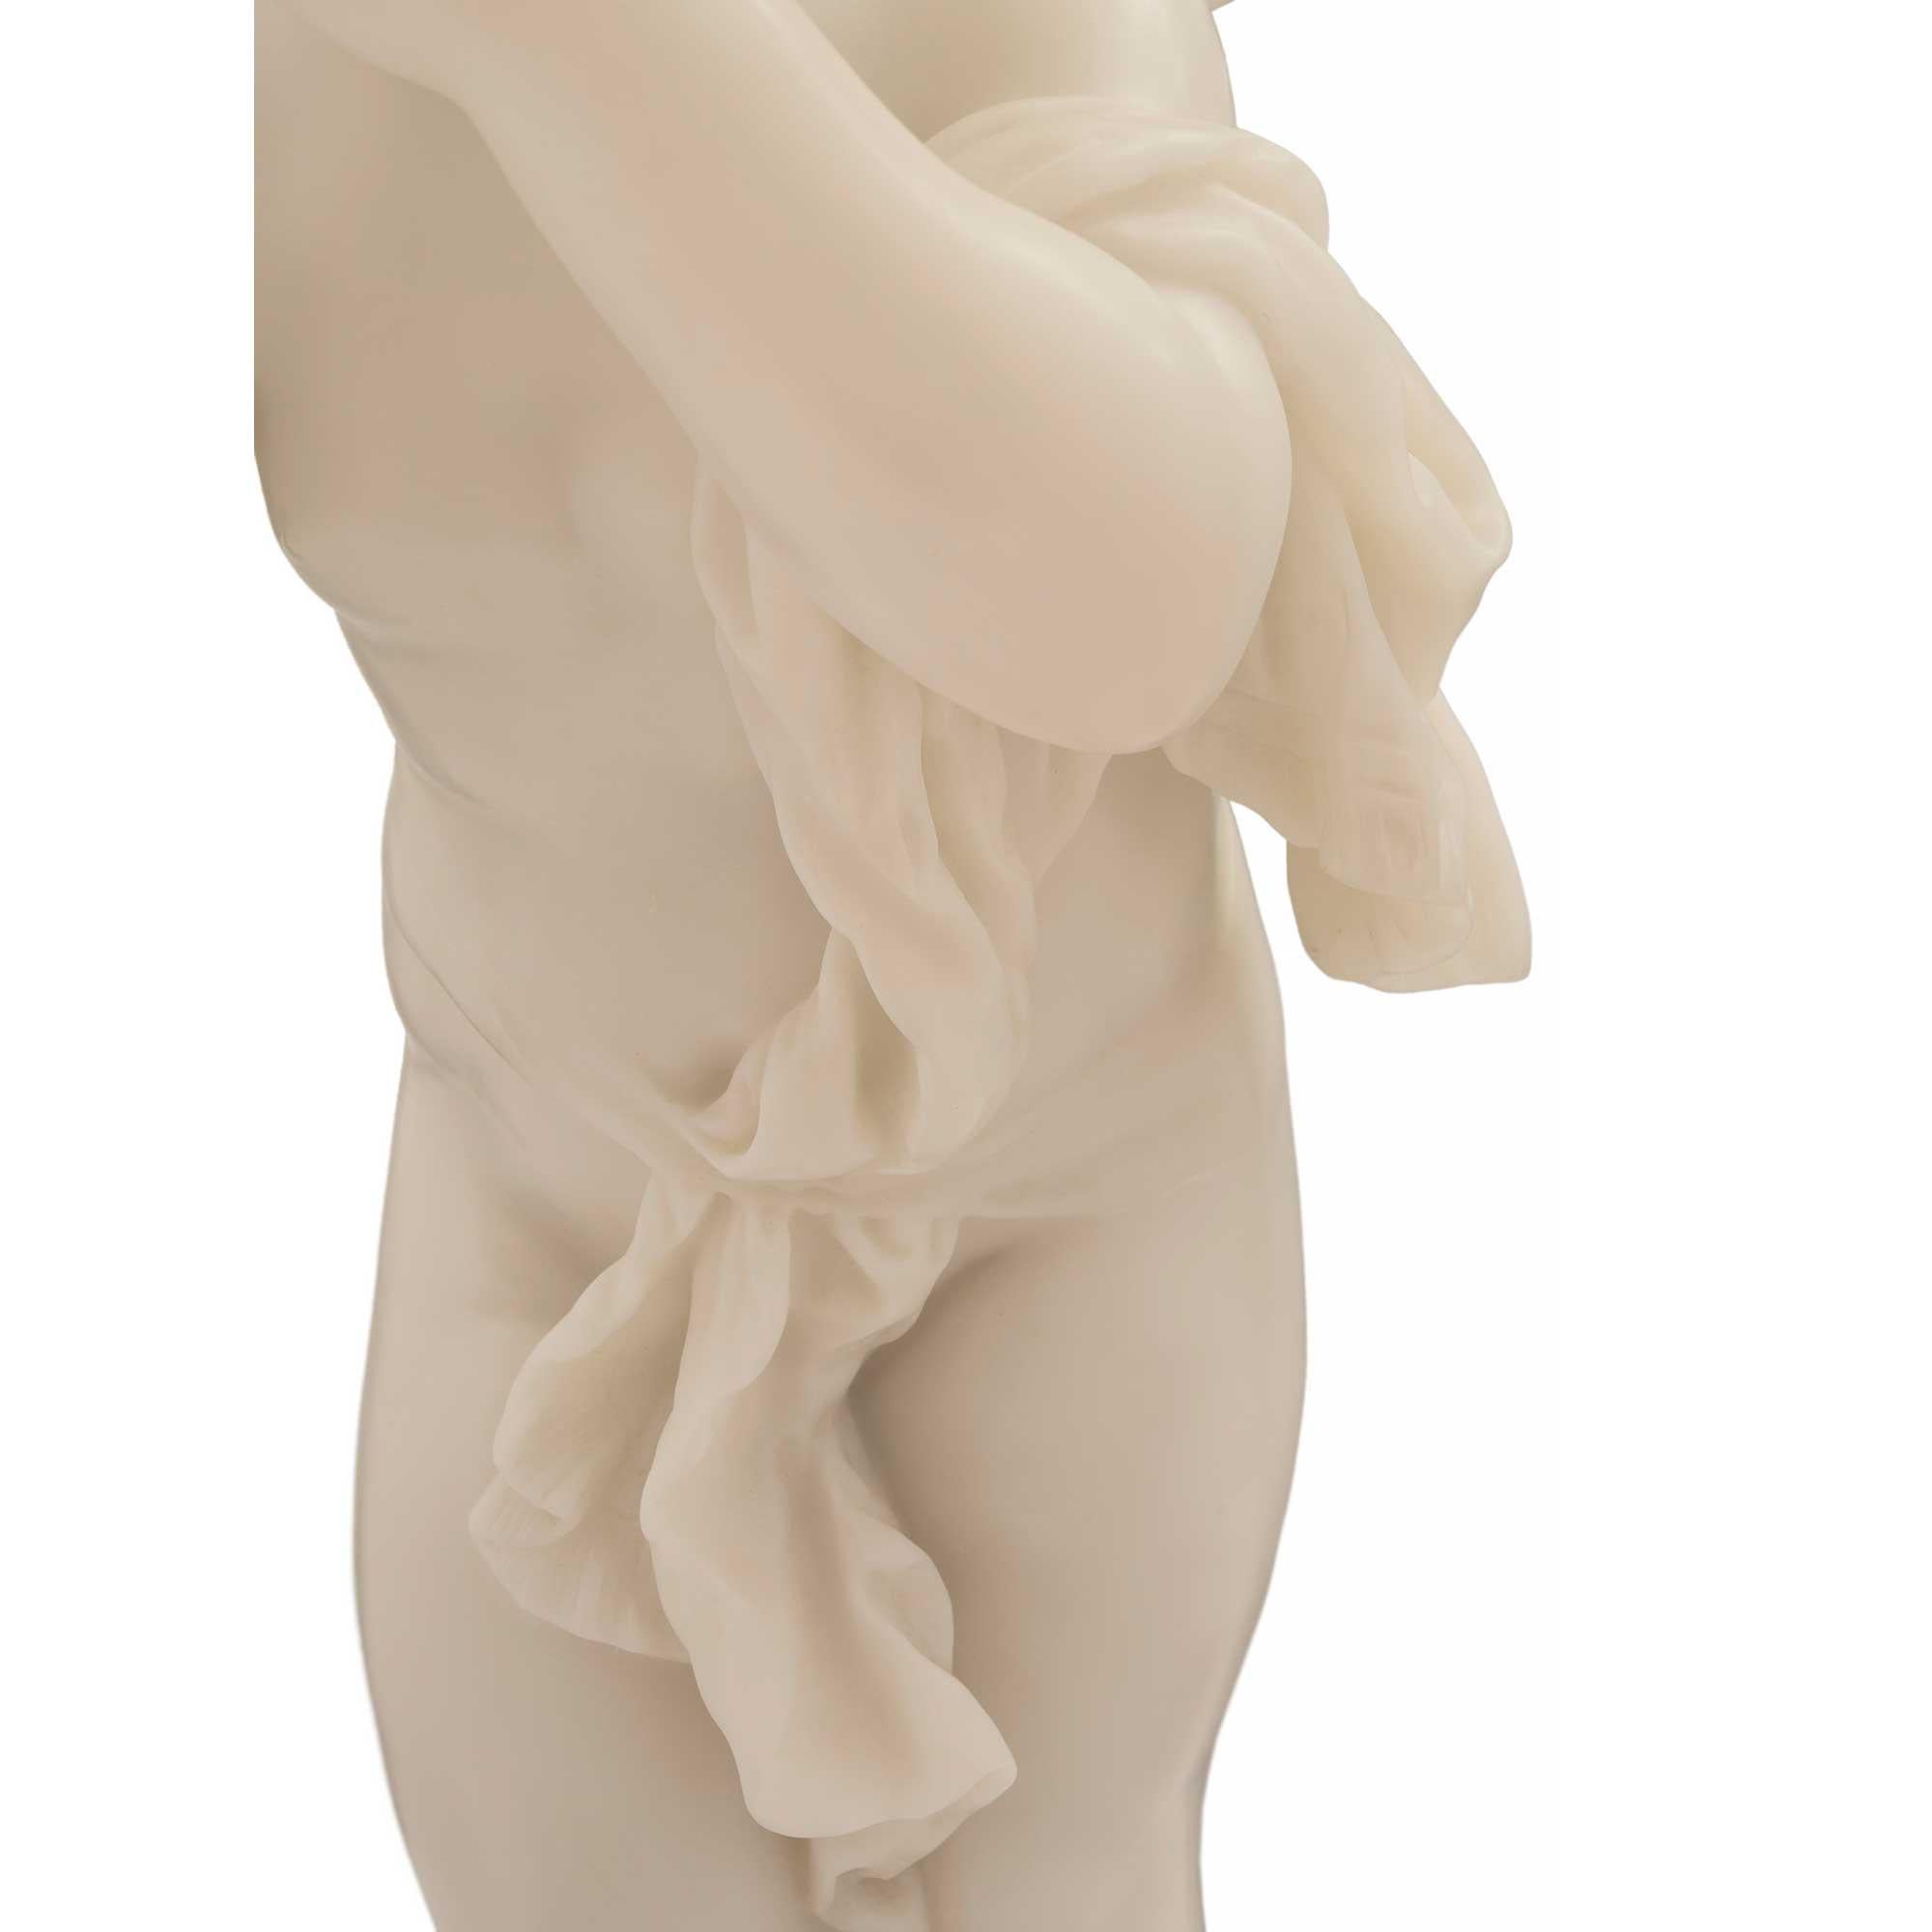 Italian Mid-19th Century White Carrara Marble Statue of Winged Girl For Sale 5